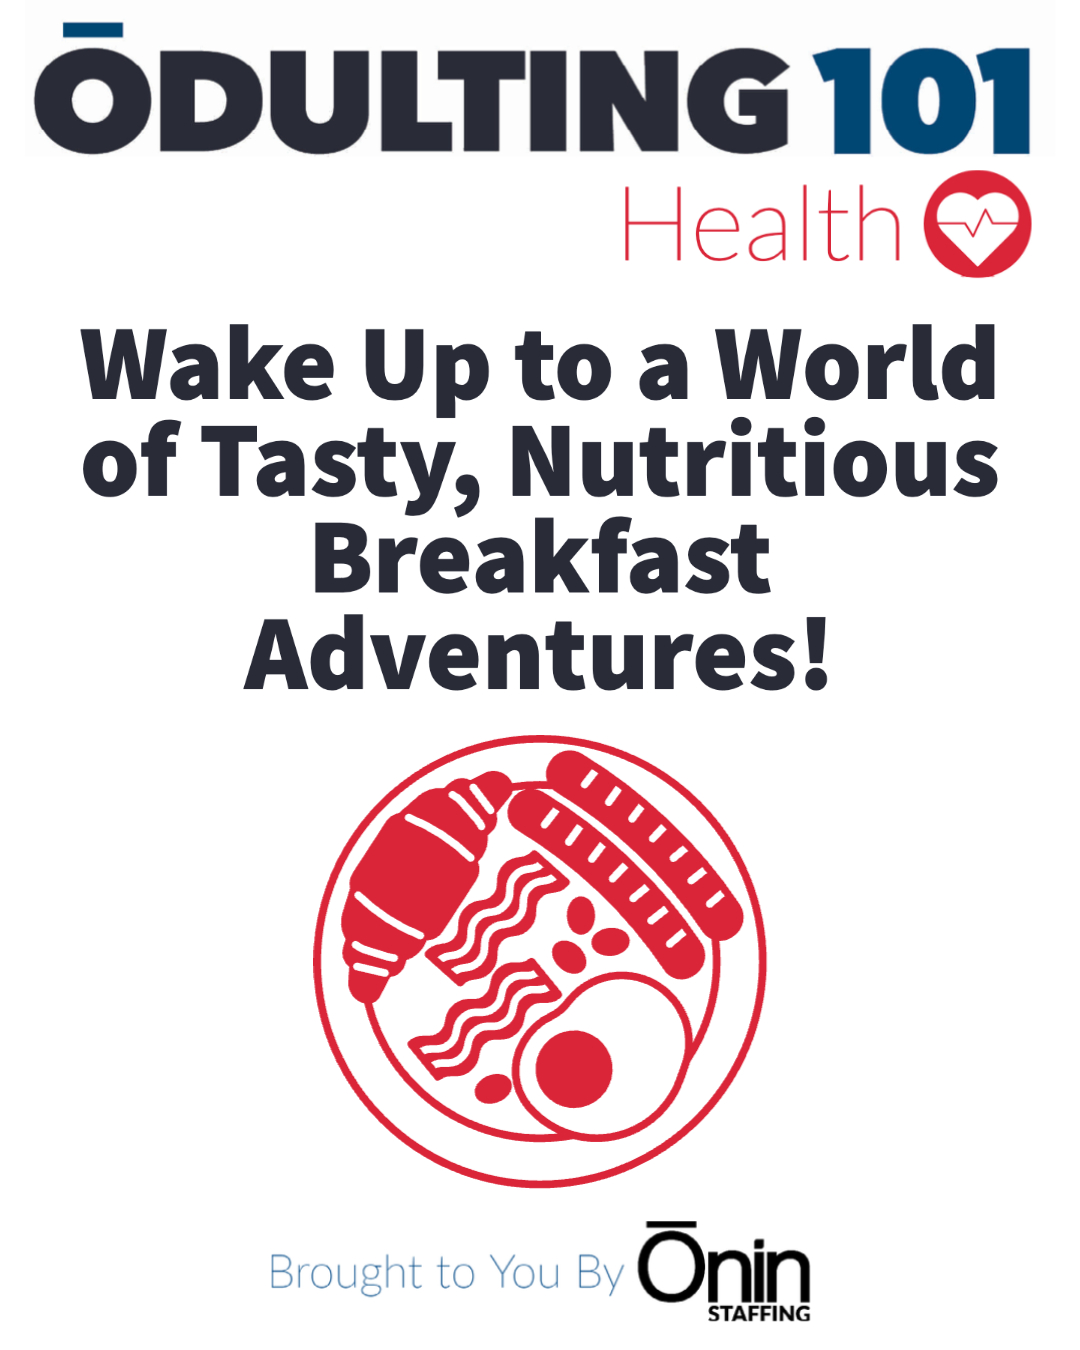 Odulting Health series image featuring the title 'Wake Up to a World of Tasty, Nutritious Breakfast Adventures!' with a line drawing of a red plate with breakfast foods including eggs, bacon, sausage, and croissant, brought to you by Onin Staffing."